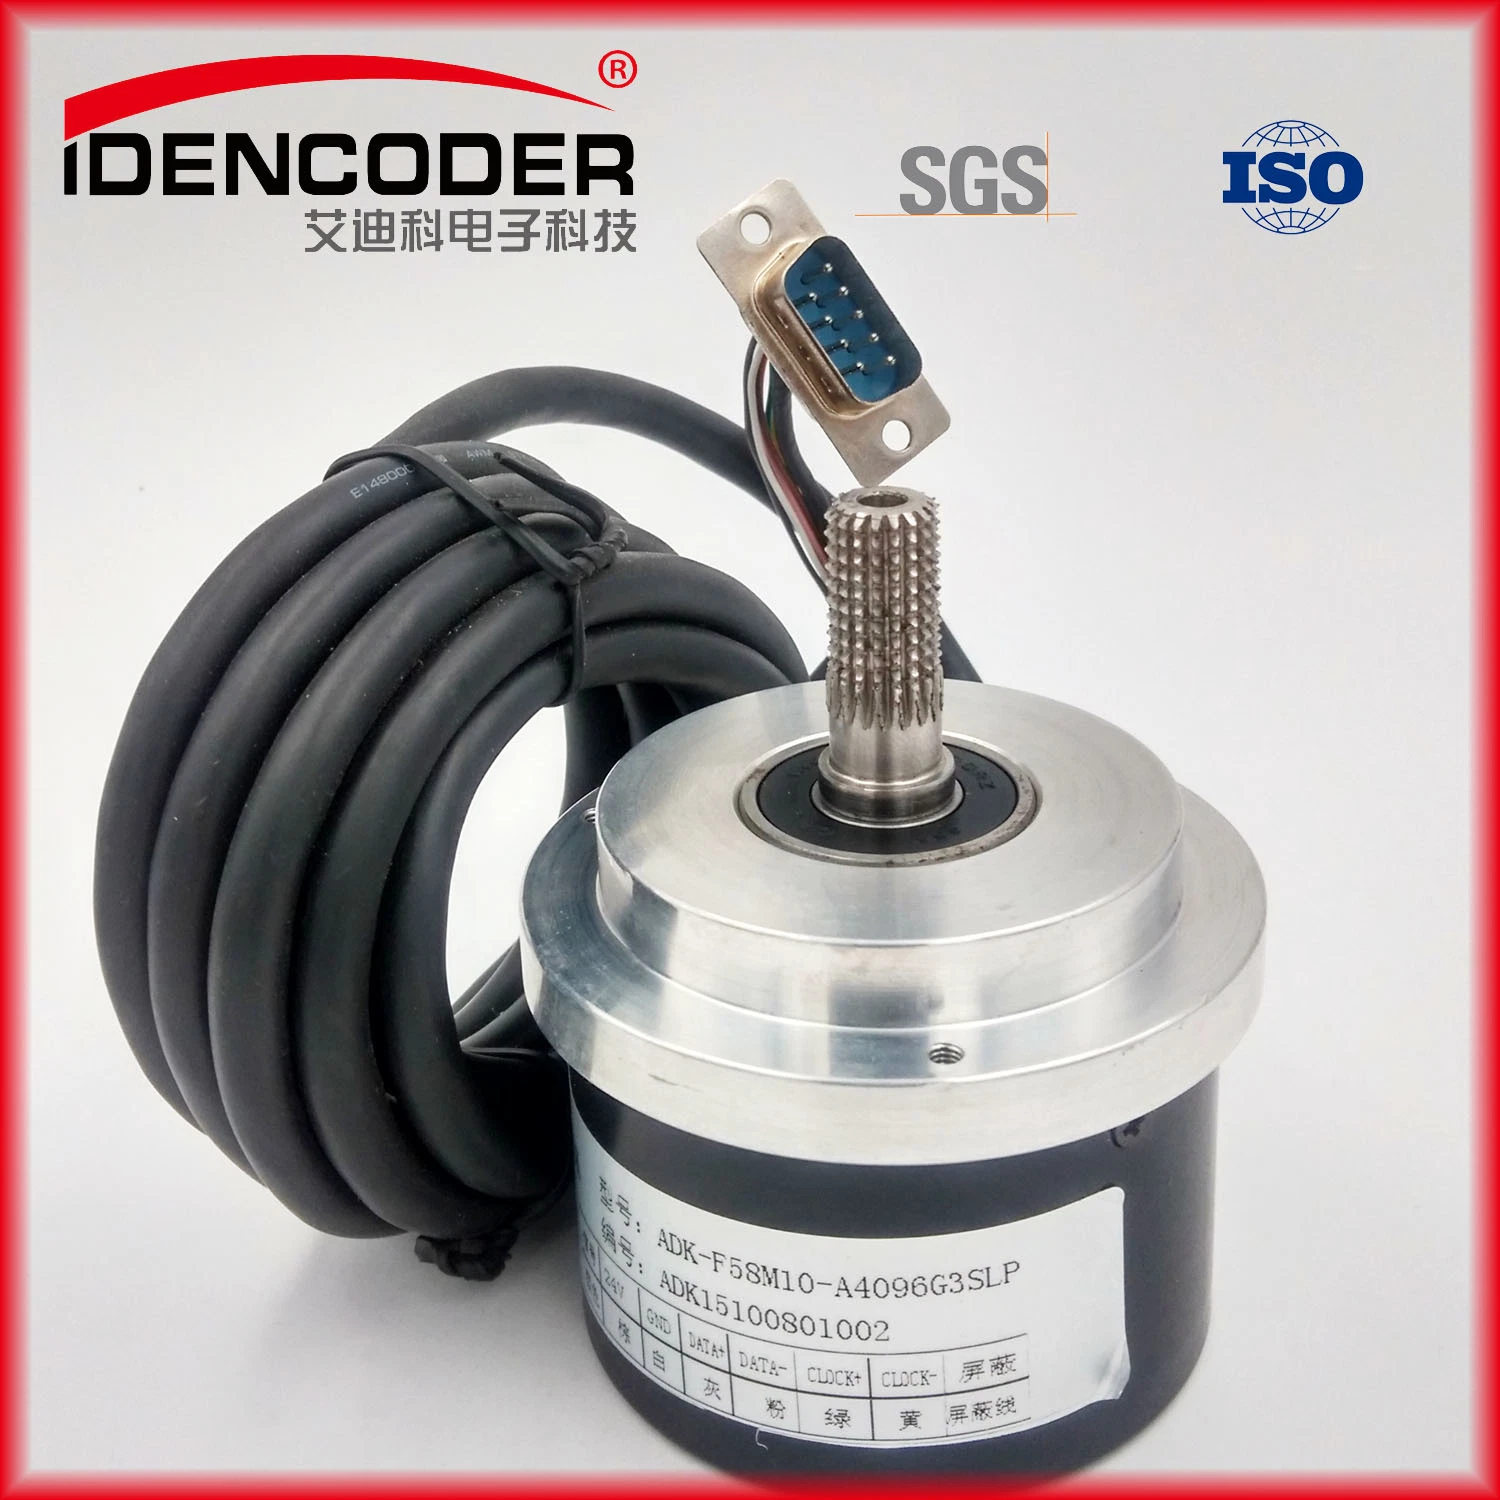 Lathe CNC Spindle Semi-Hollow Encoder, Optical Rotary Encoder Sensor 1042PPR 3600PPR Line Drive PNP/NPN Output Can Available Other Output Form